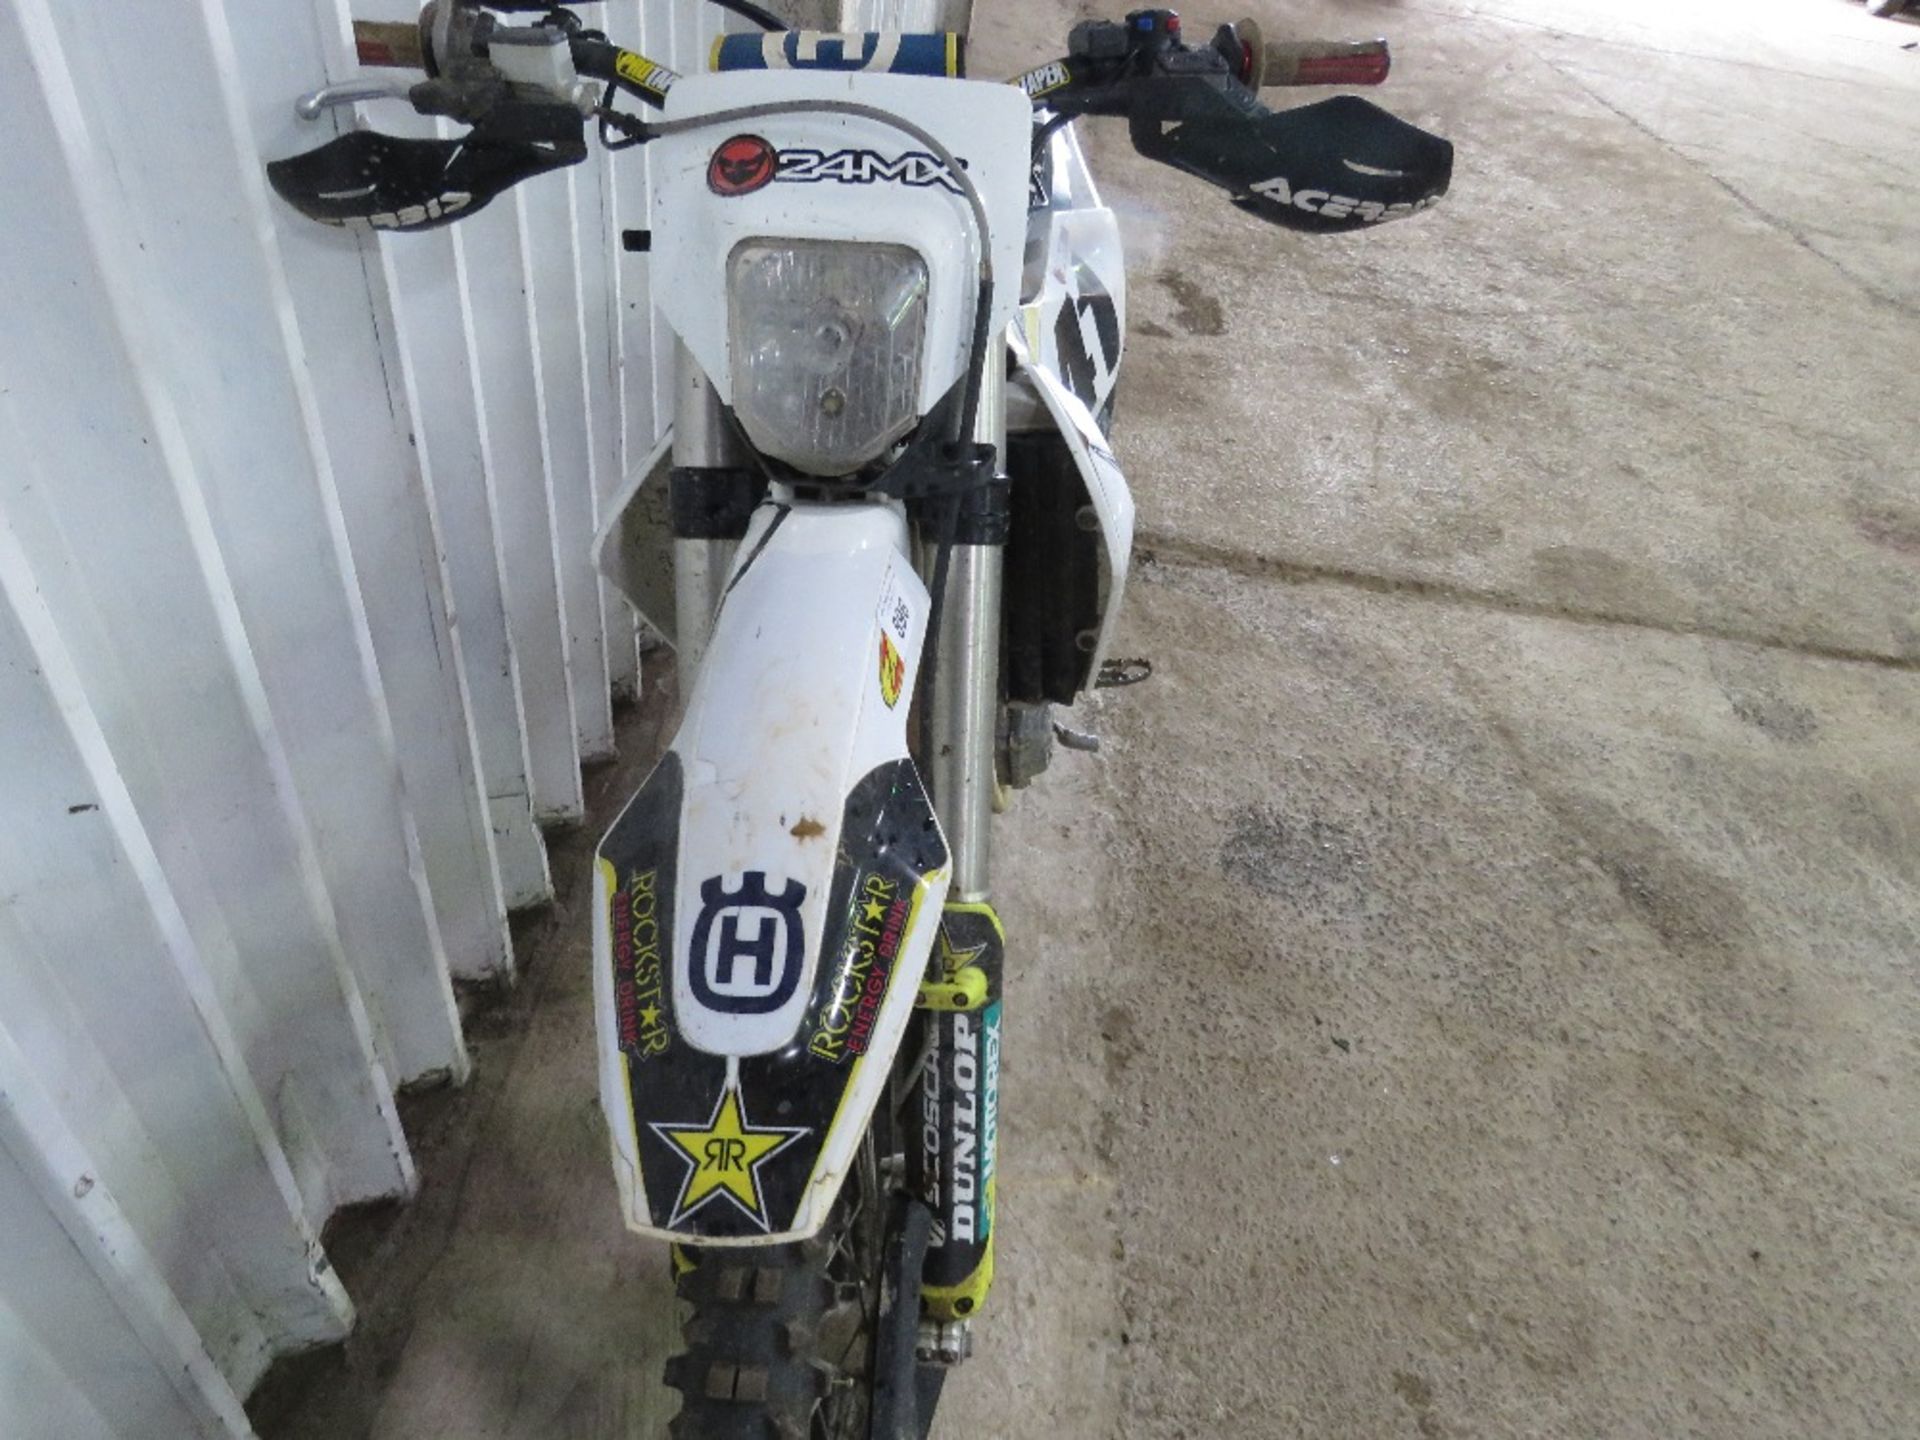 HUSQVARNA 450CC TRIALS BIKE, REG:LK18 EXO WITH V5 (FIRST ROAD REGISTERED 2021). WHEN TESTED WAS SEE - Image 12 of 15